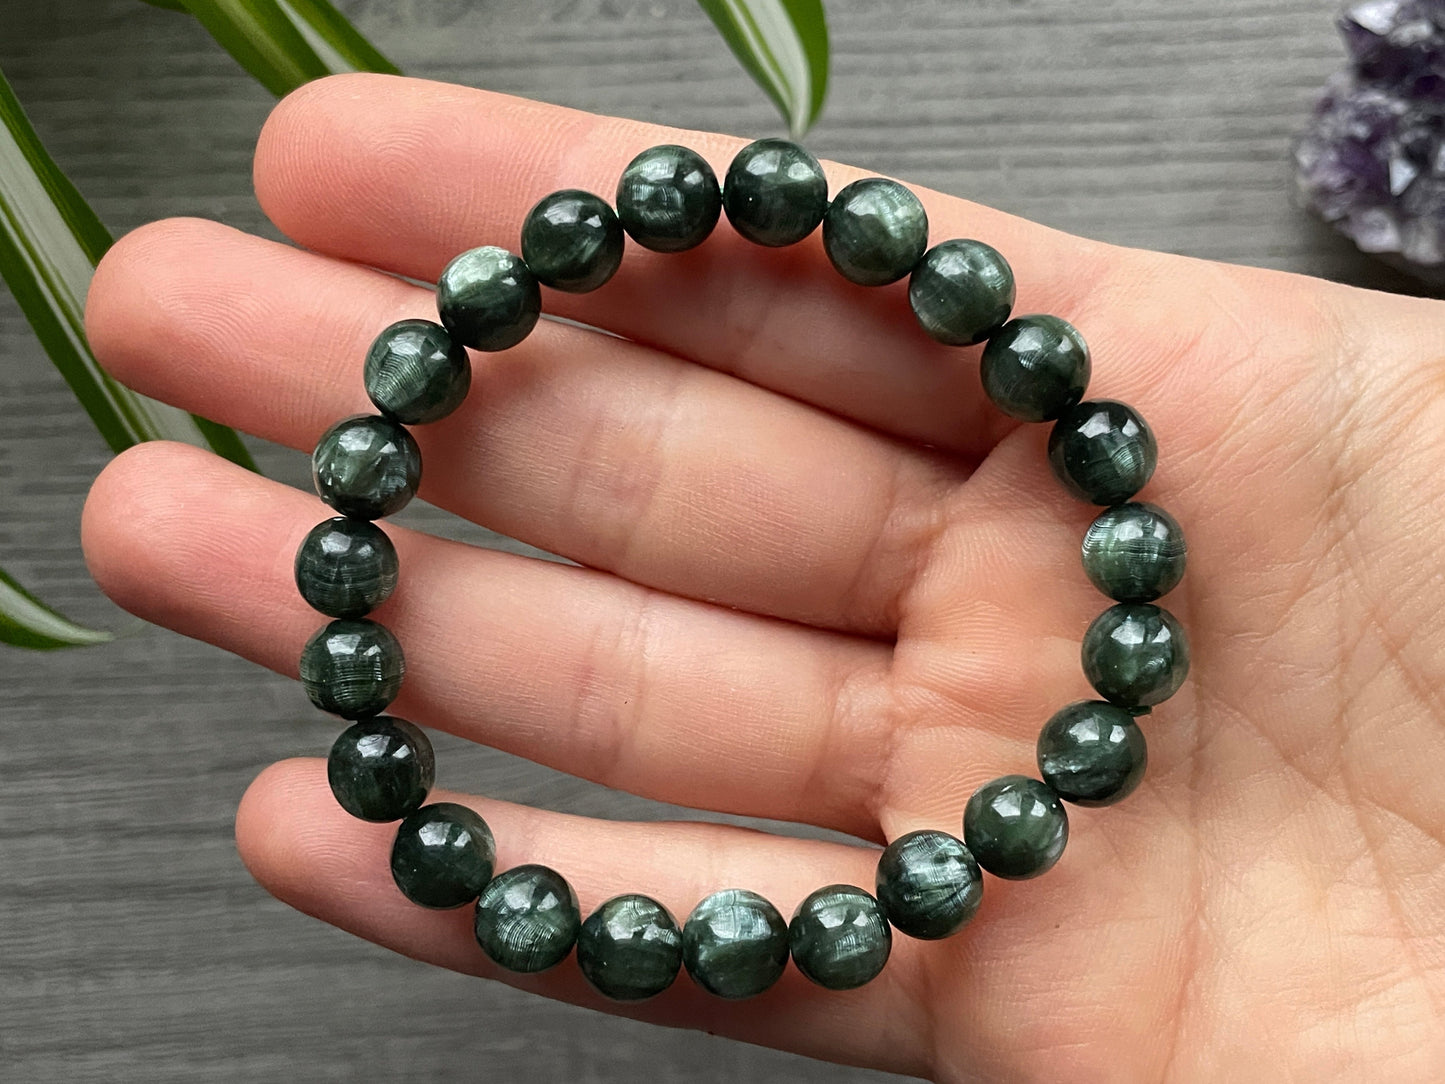 Pictured is a seraphinite bead bracelet.